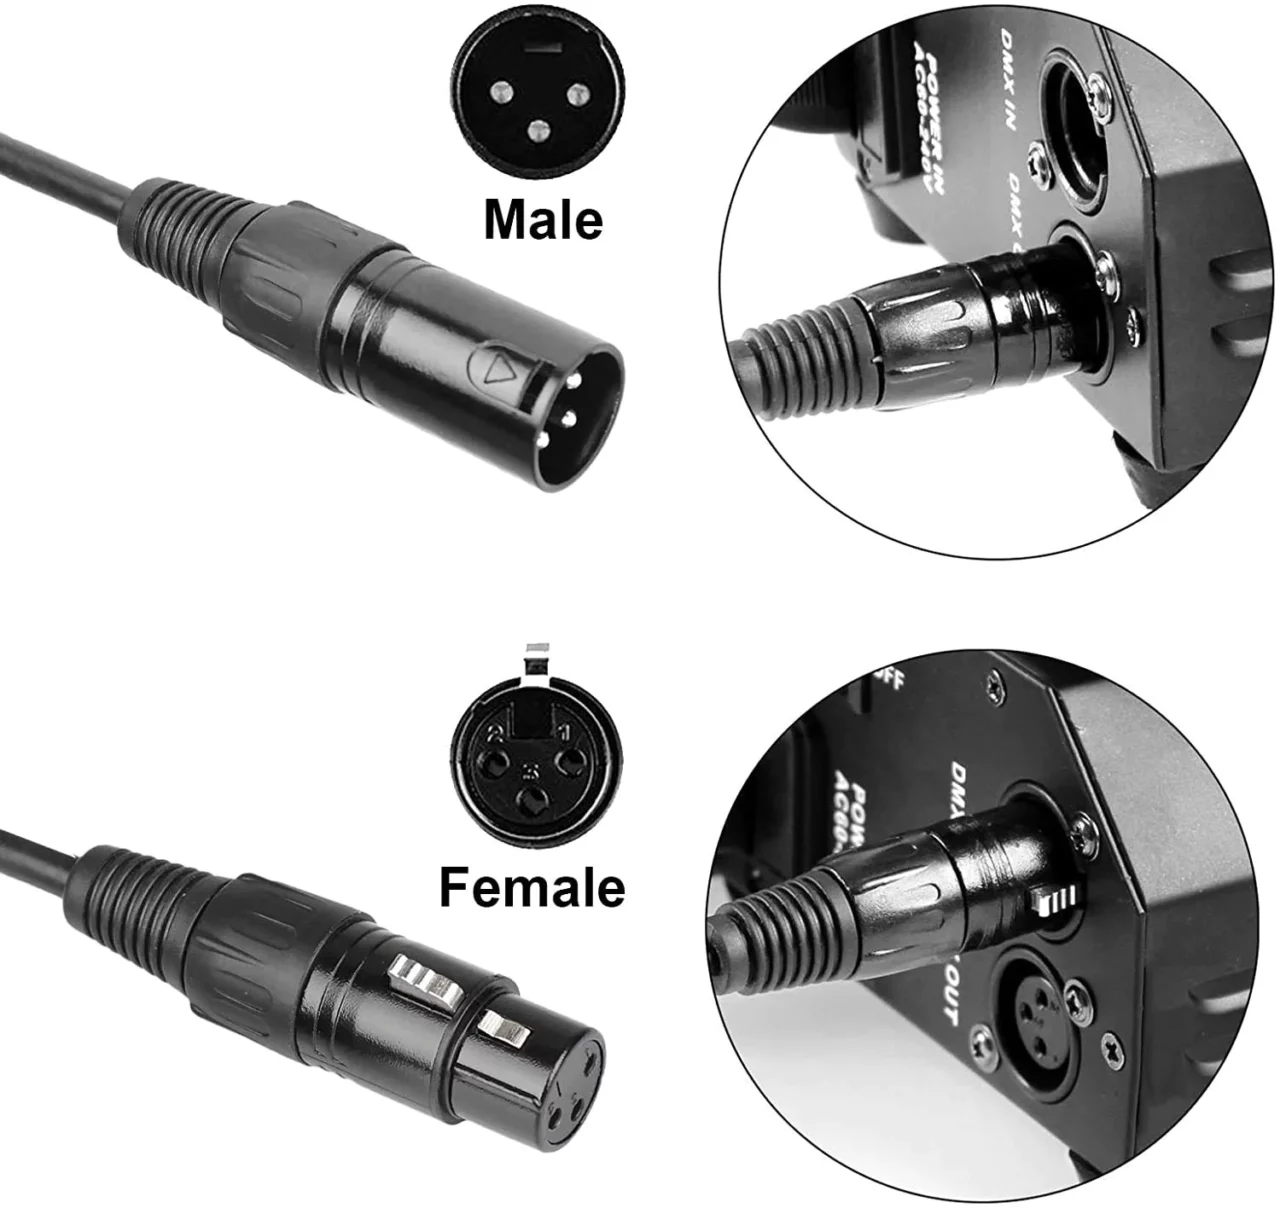 Stage light signal linked by DMX cable